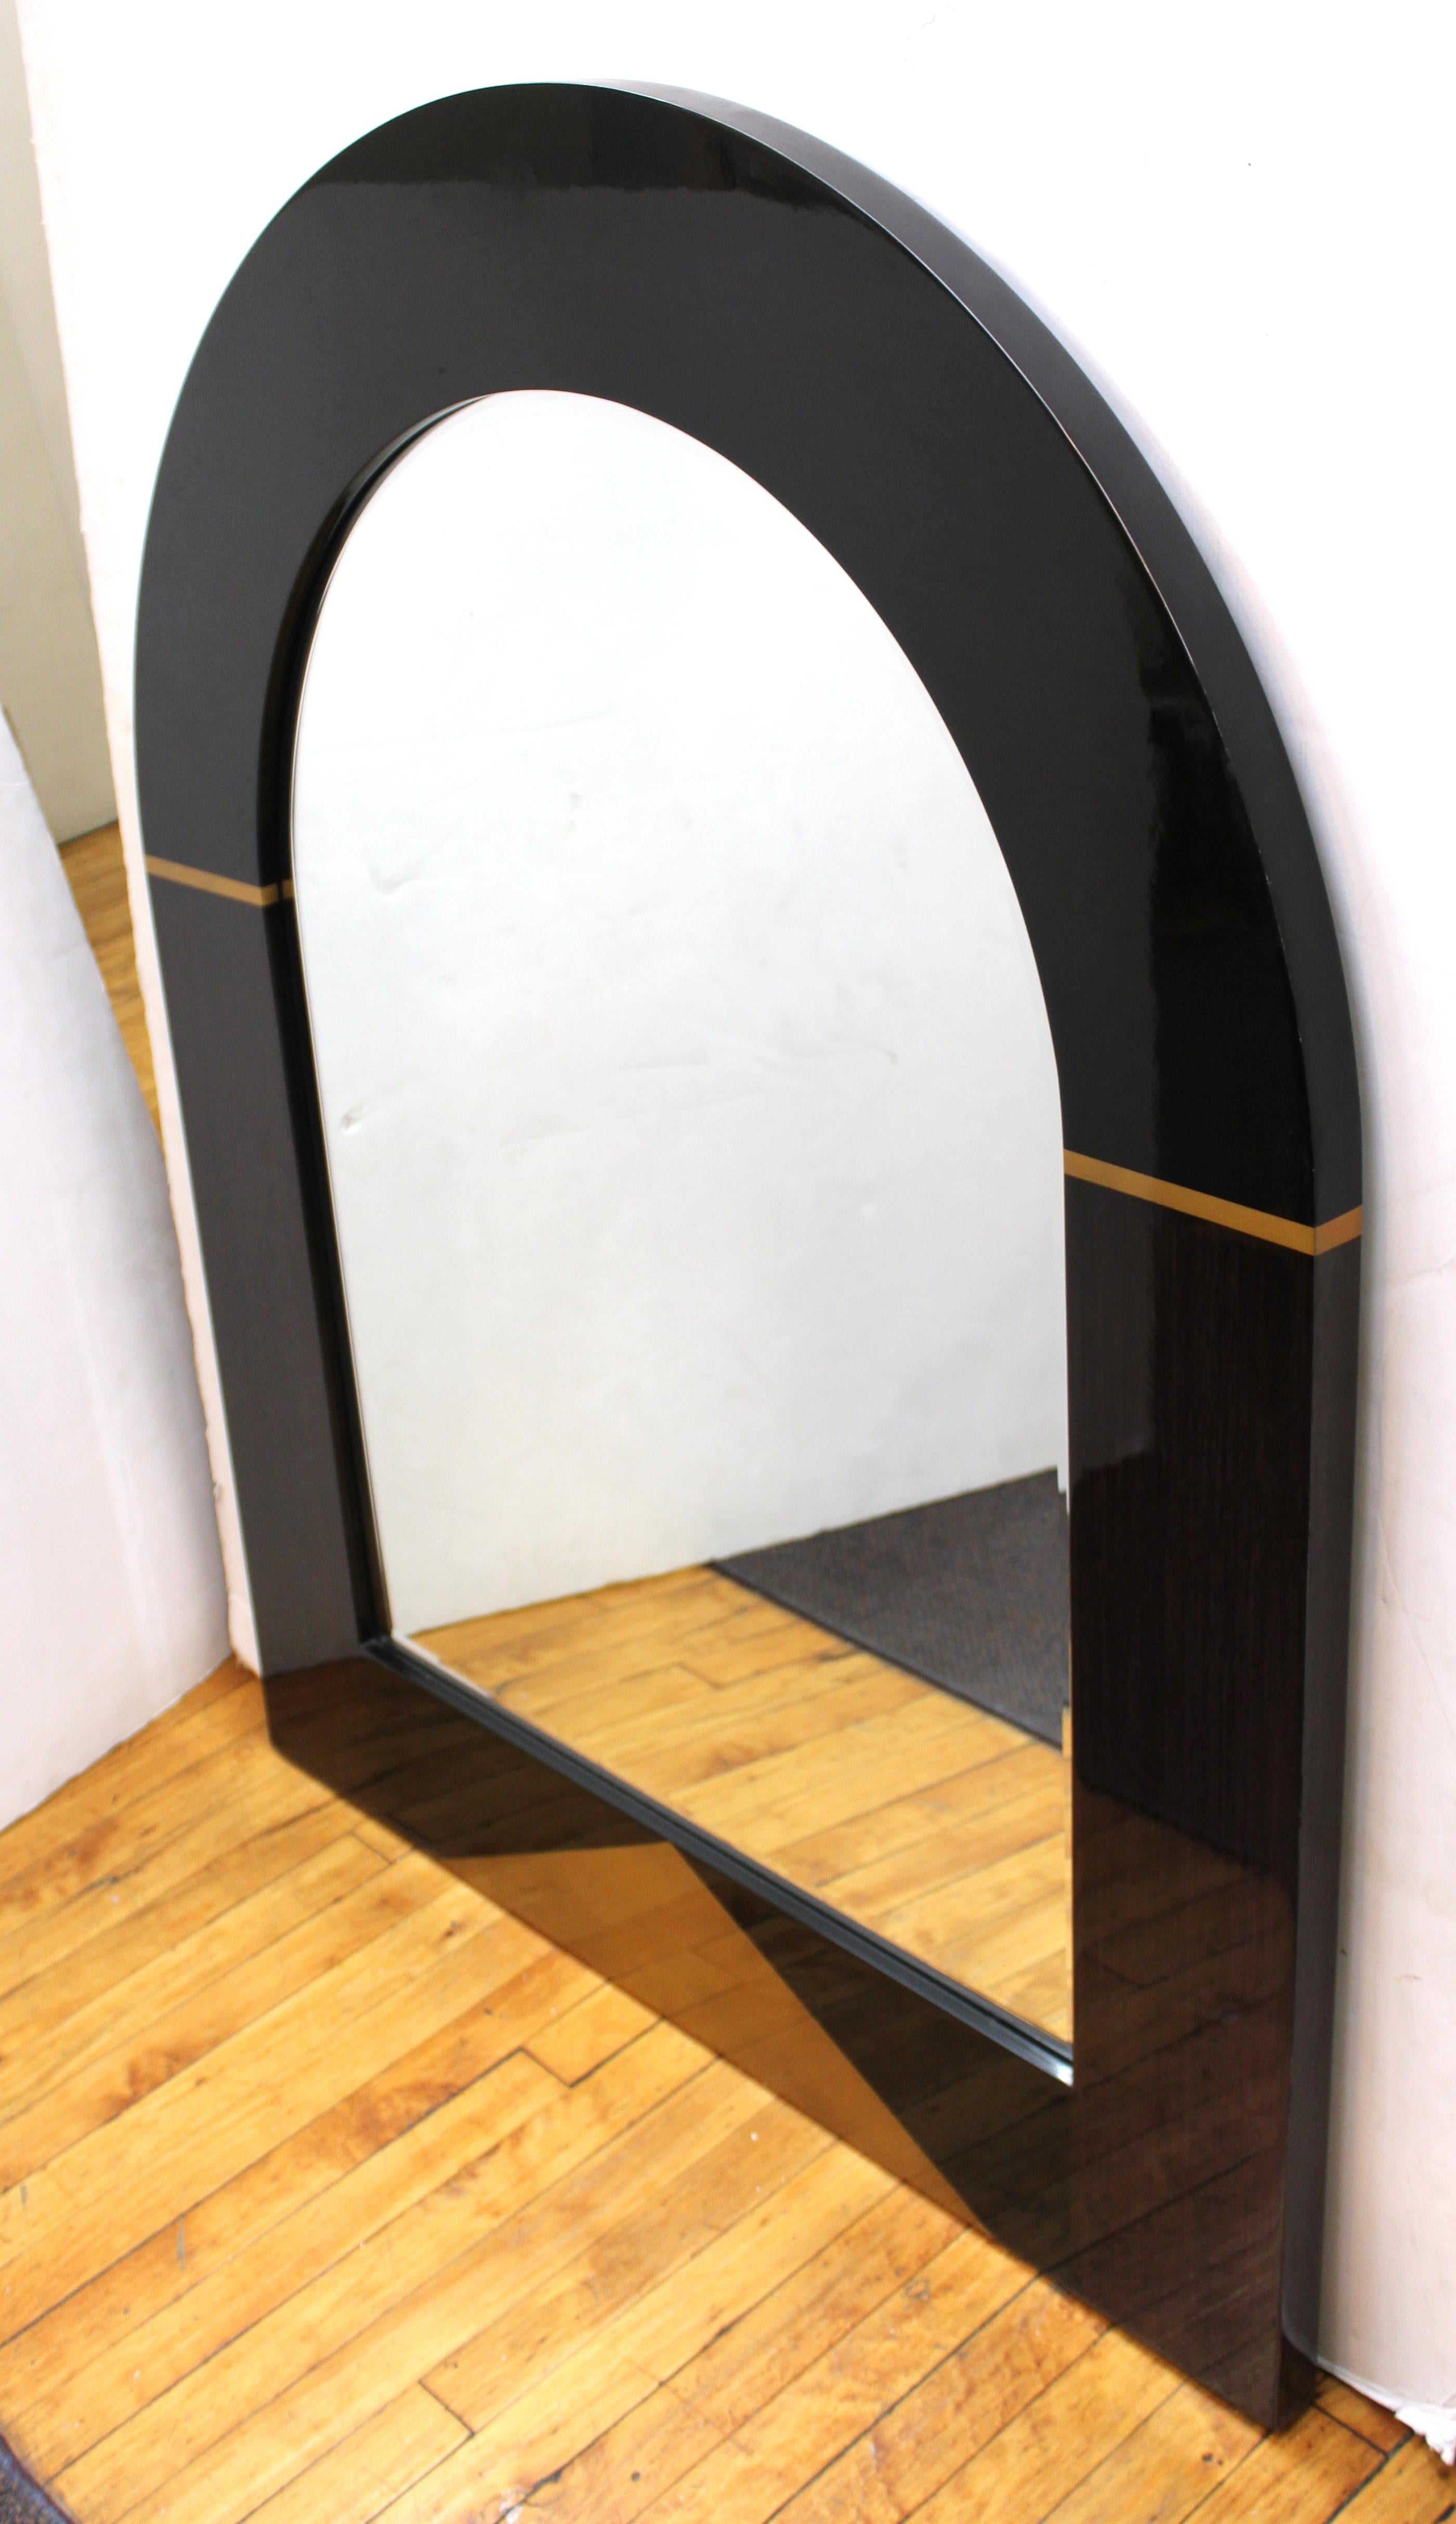 Postmodern mirror with arched top, dark wooden veneer with decorative gilt geometric accents and a lacquered finish. The piece was made in the United States during the late 20th century and is in good vintage condition.